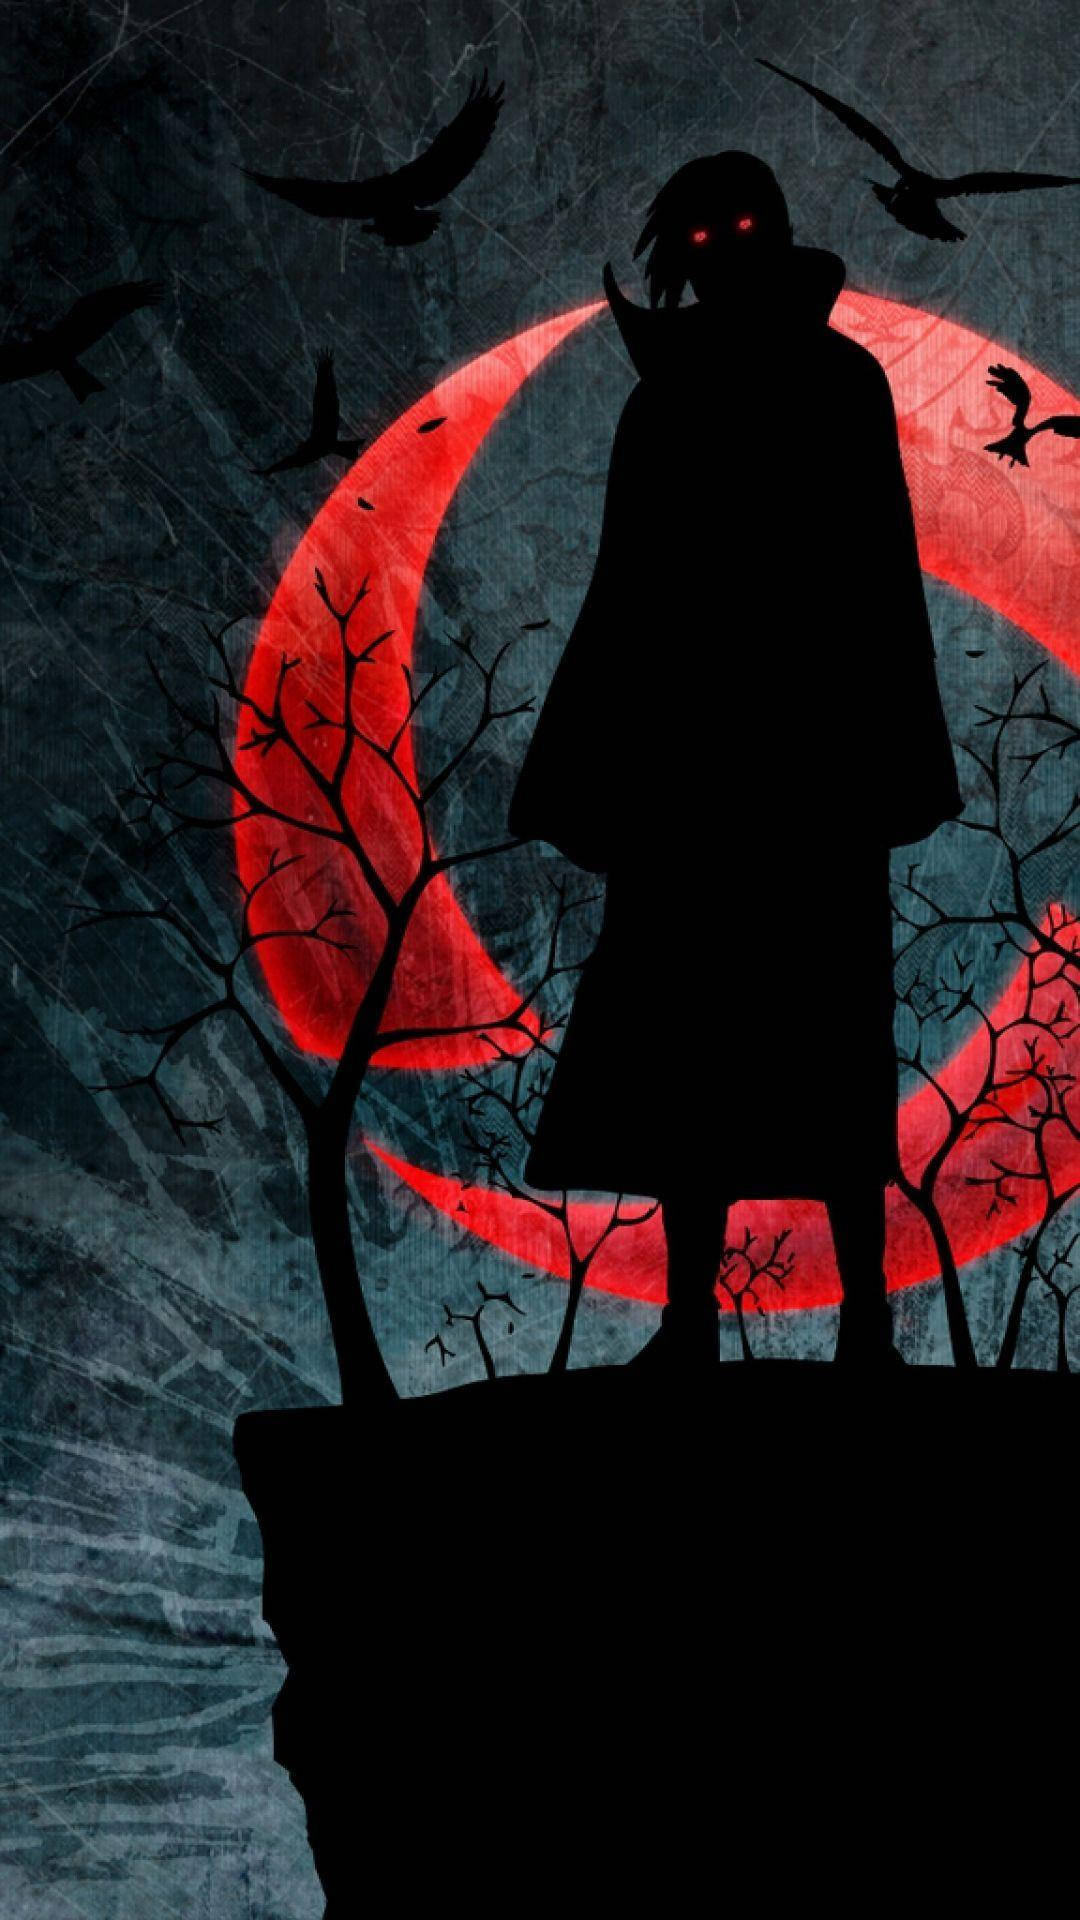 Mysterious Itachi Uchiha Under The Haunting Red Moon. Background